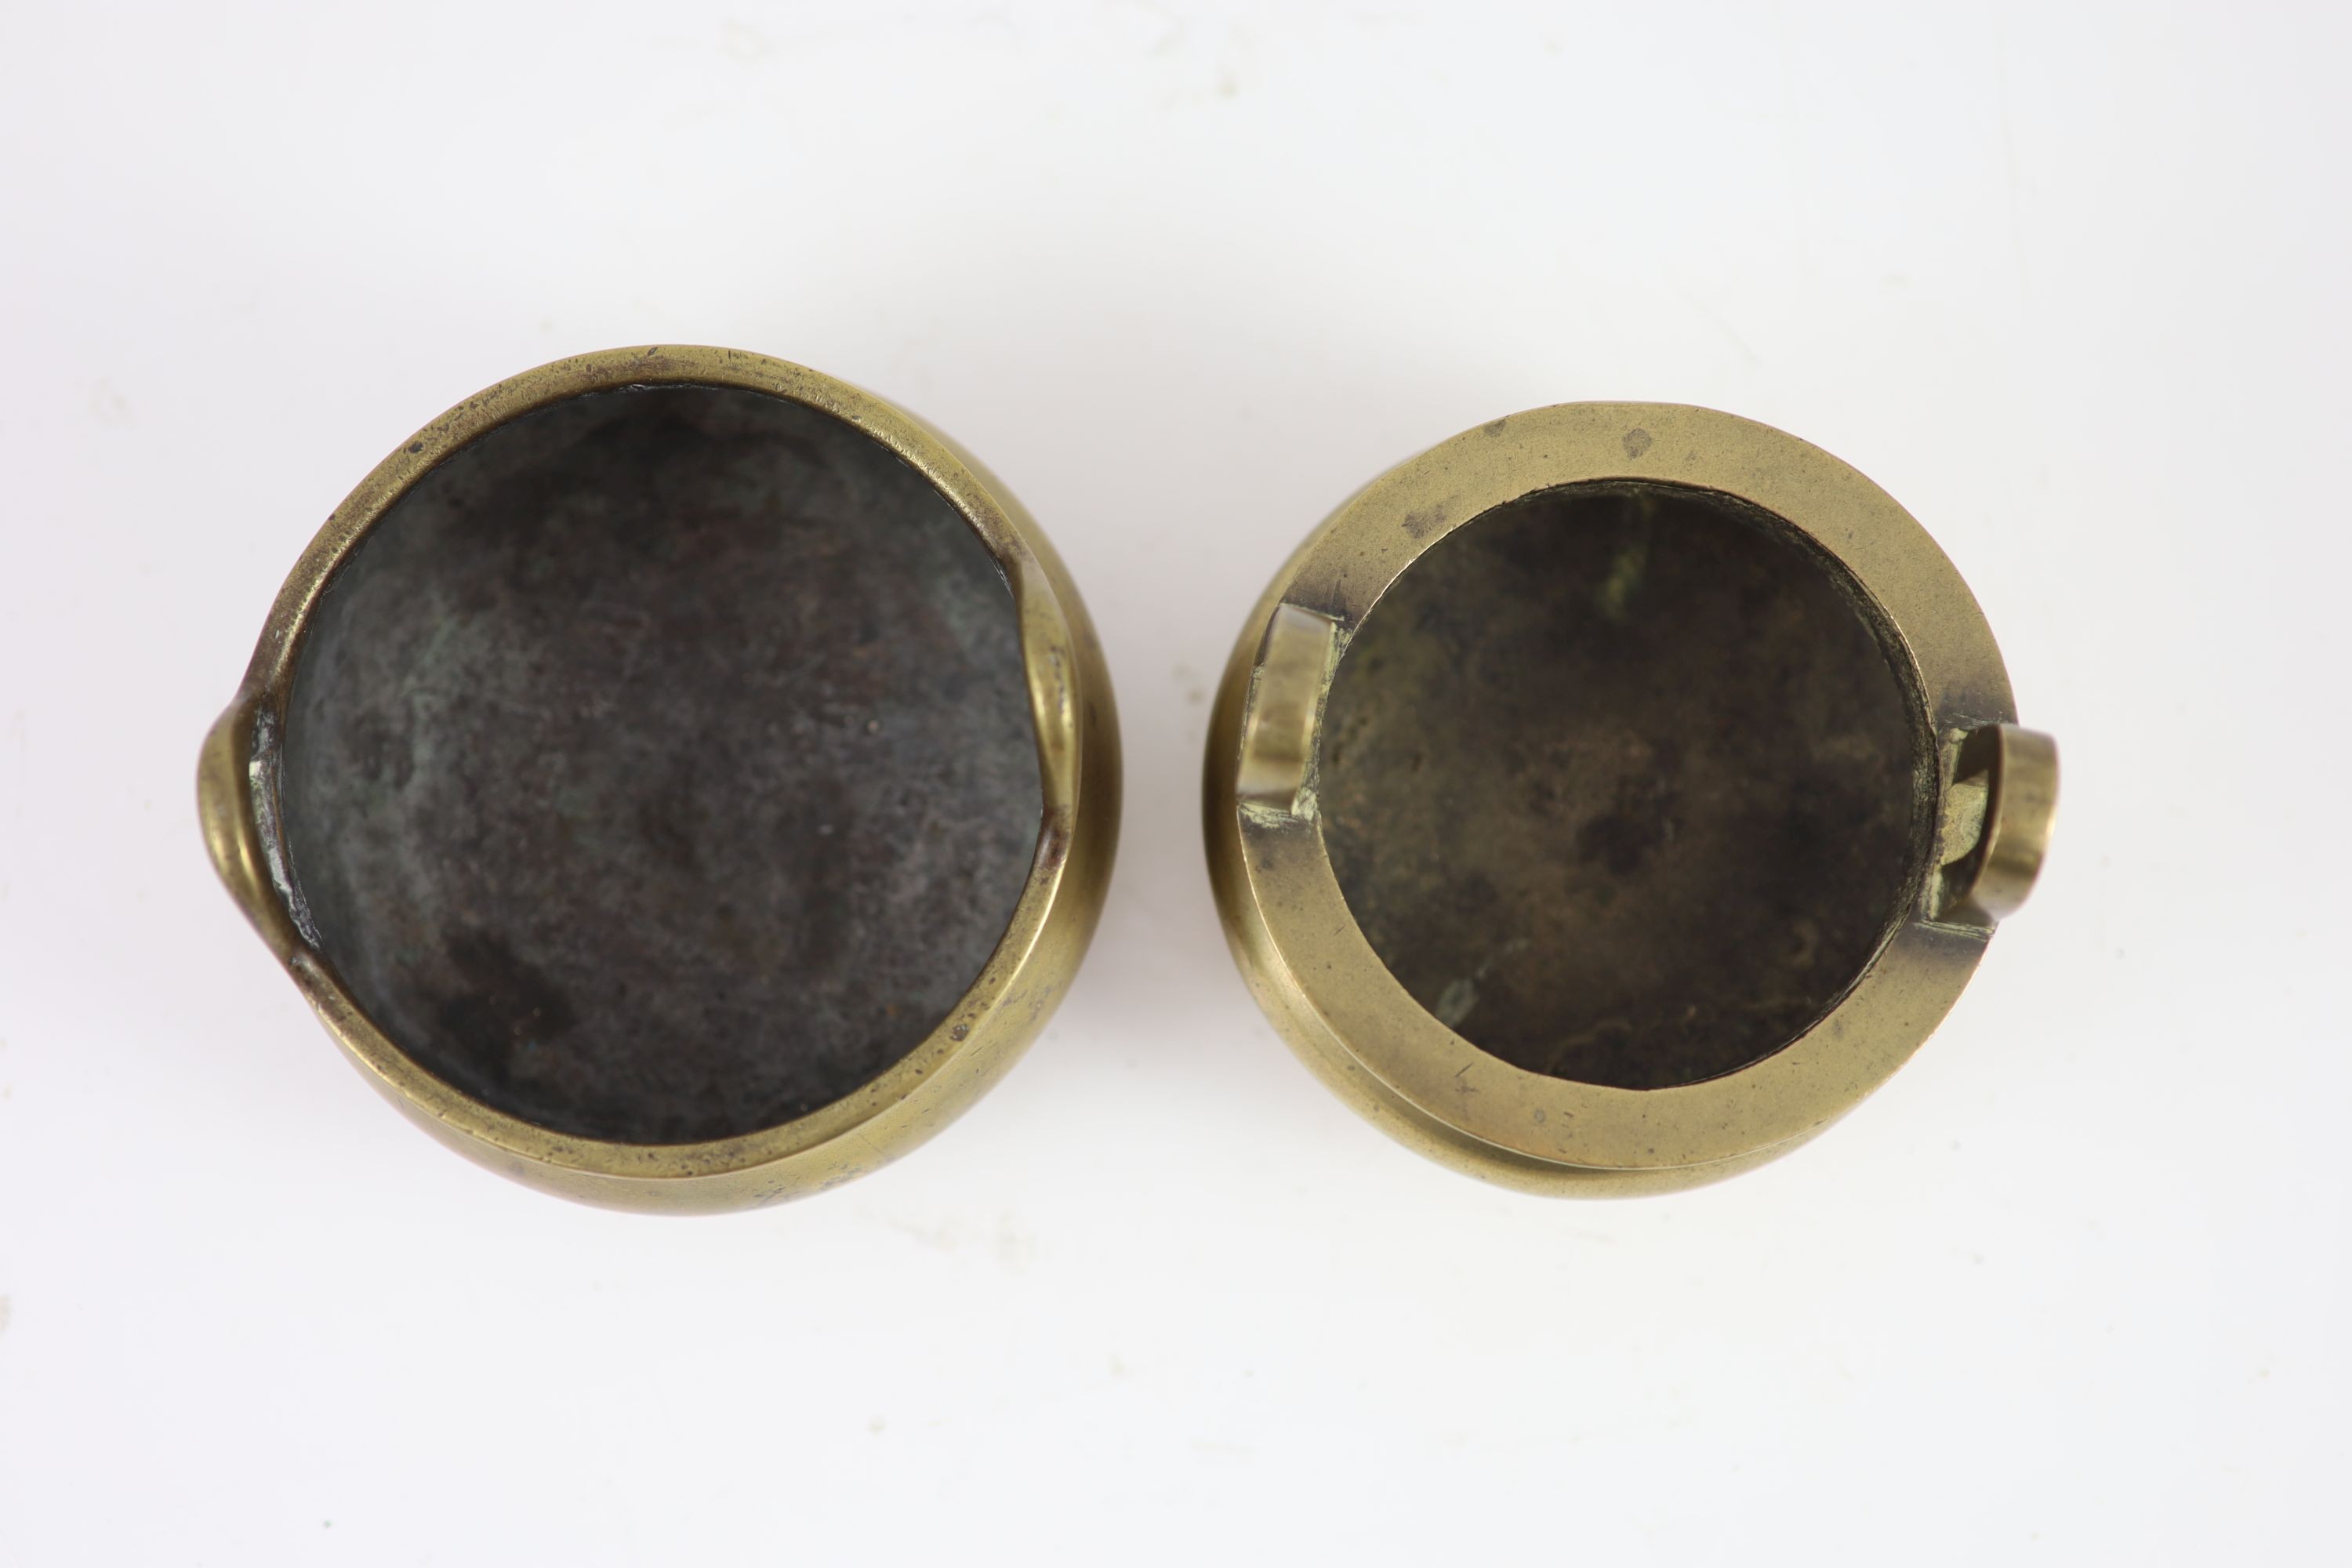 Two Chinese bronze tripod censers, 18th and 19th century